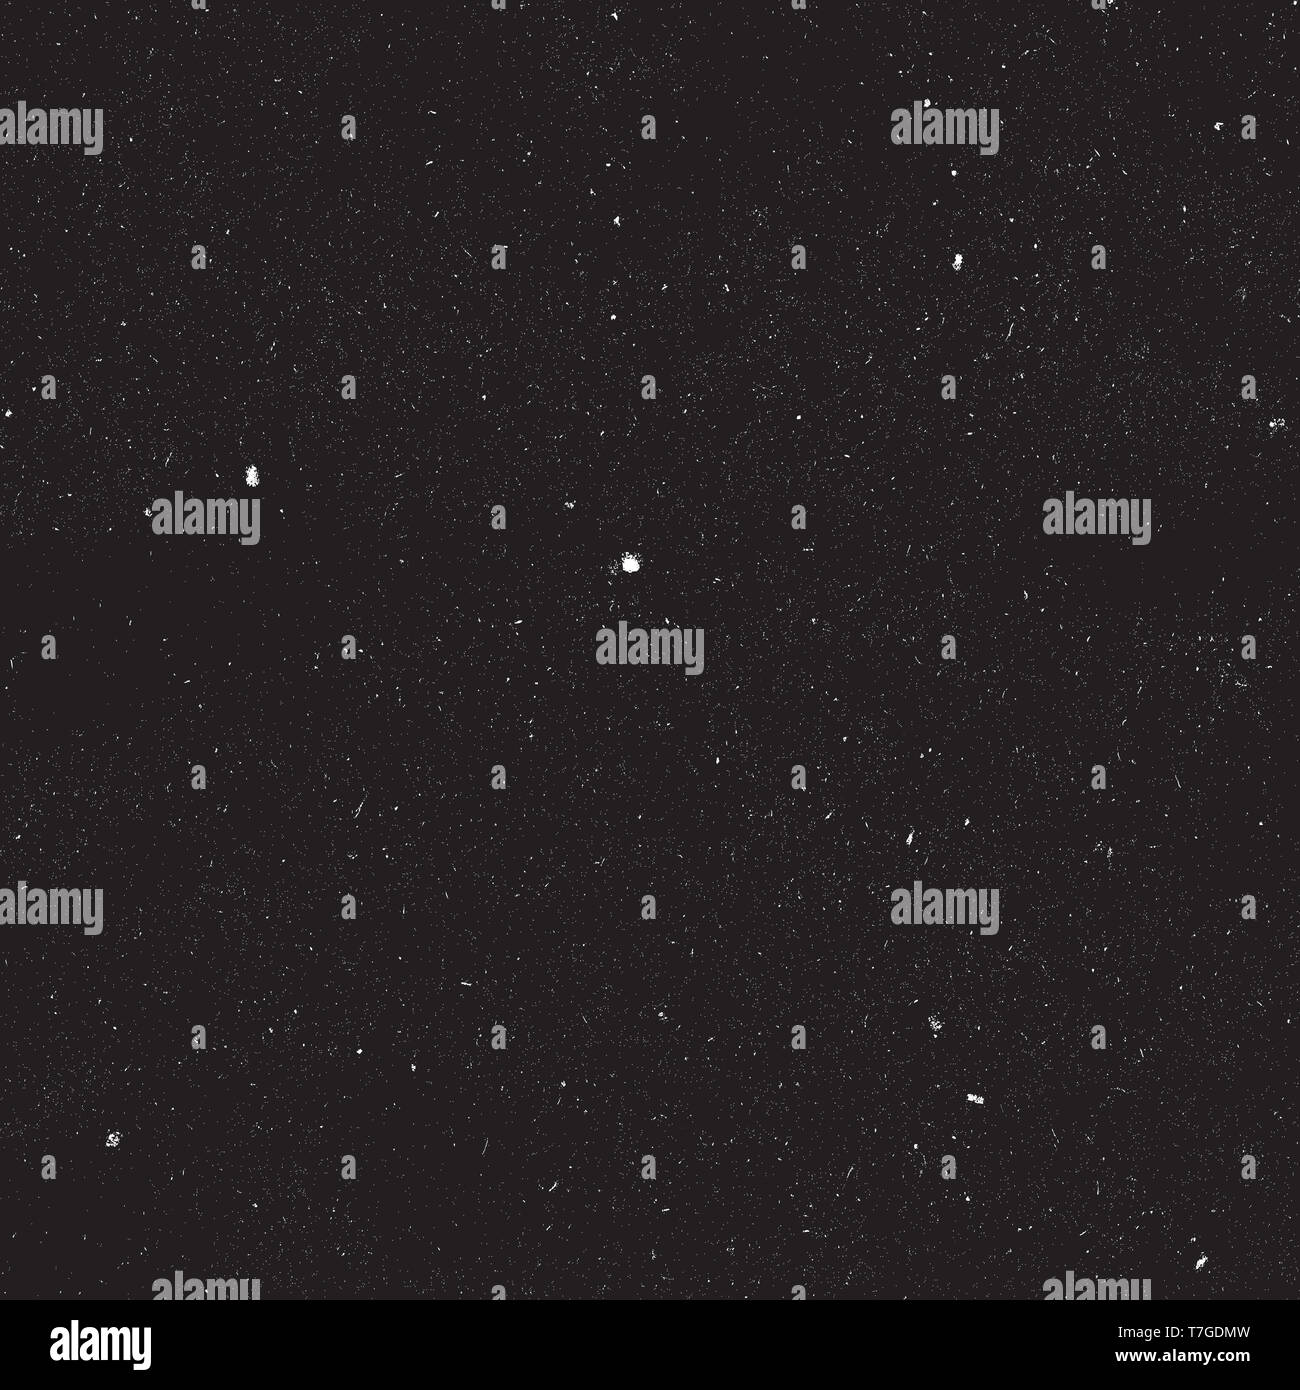 Grunge style background with dust speckles design Stock Photo